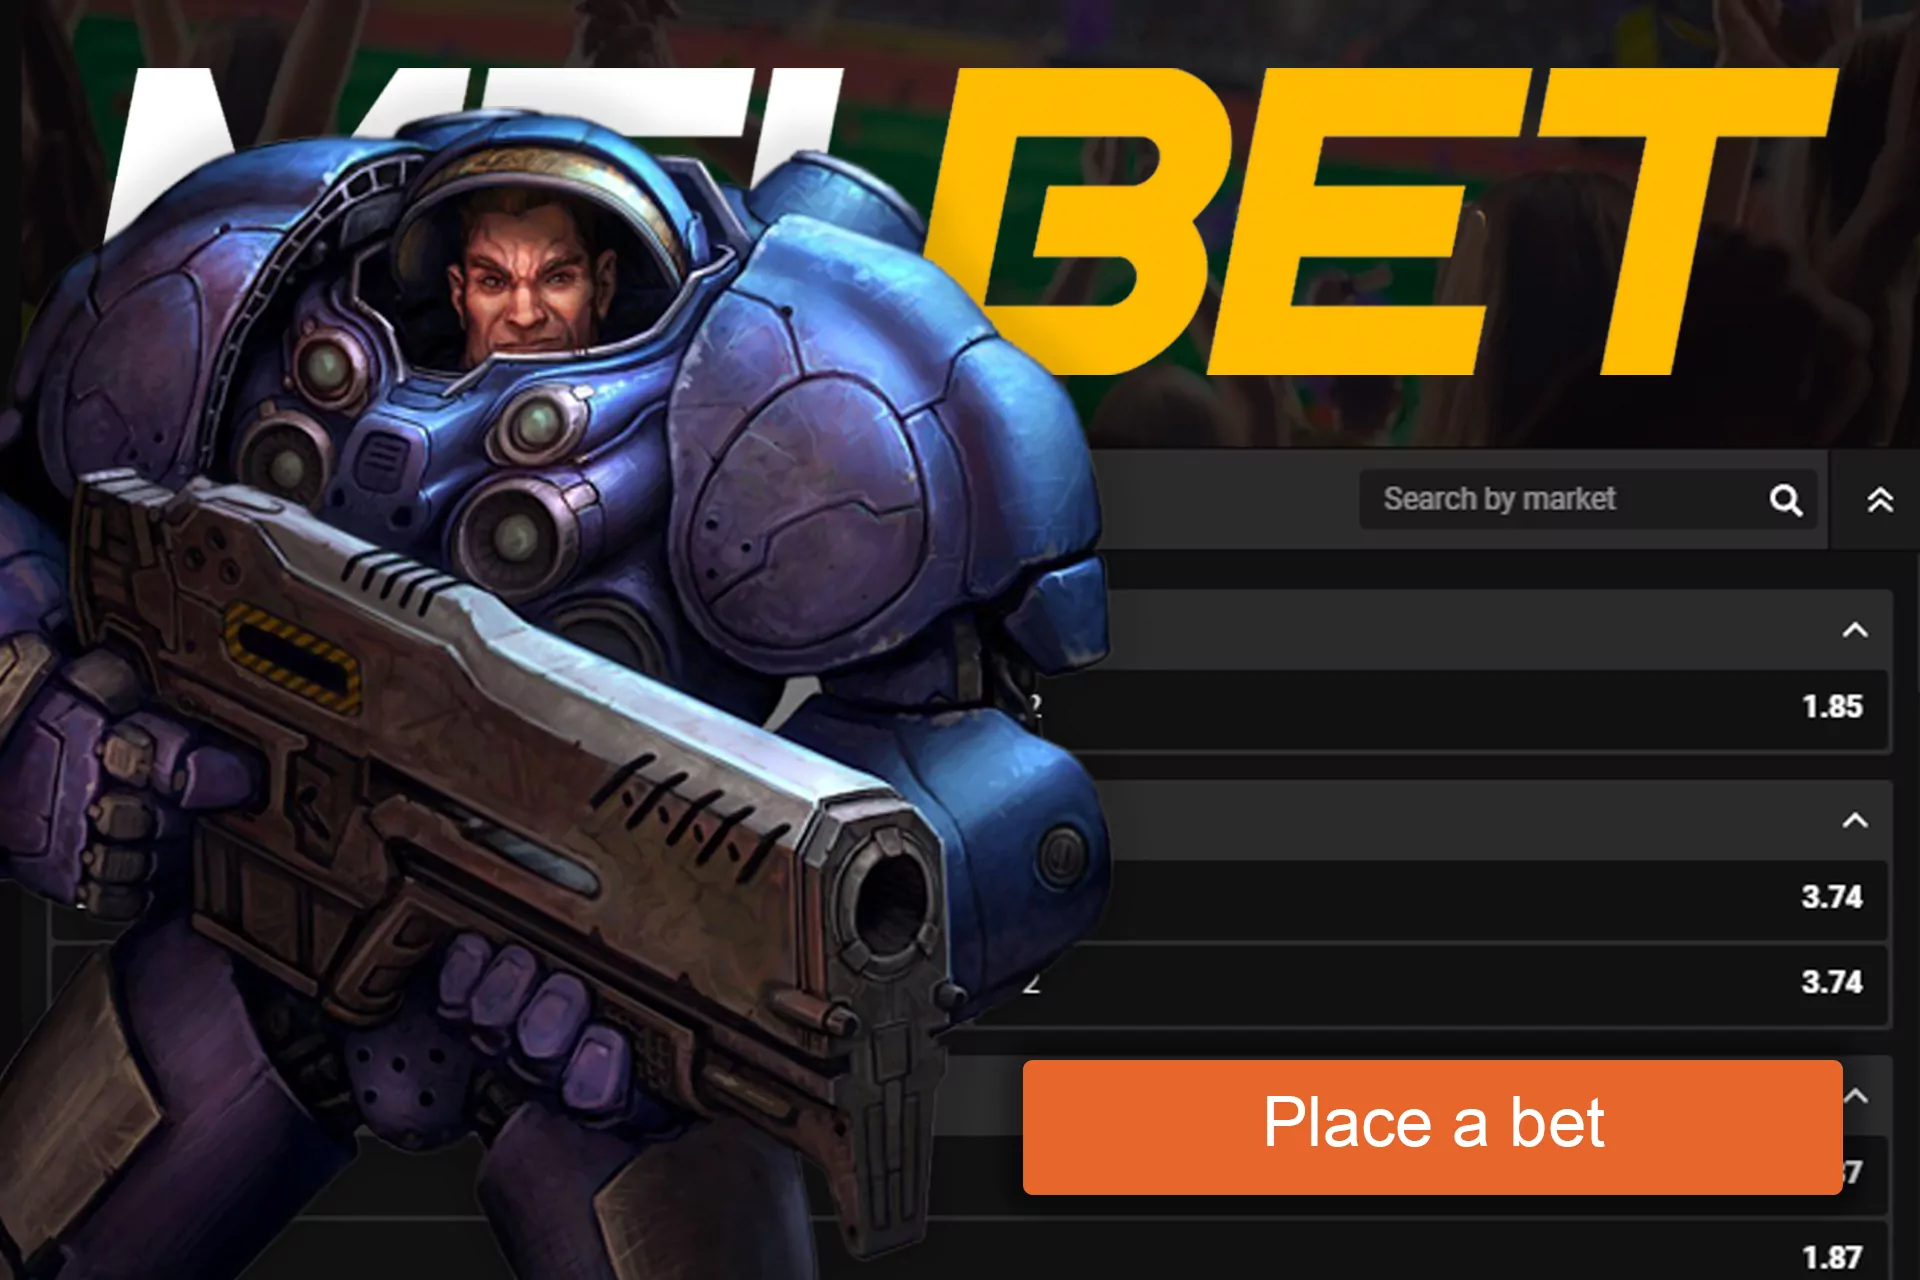 If you can predict an outcome of a Starcraft II match, place a bet on Melbet.